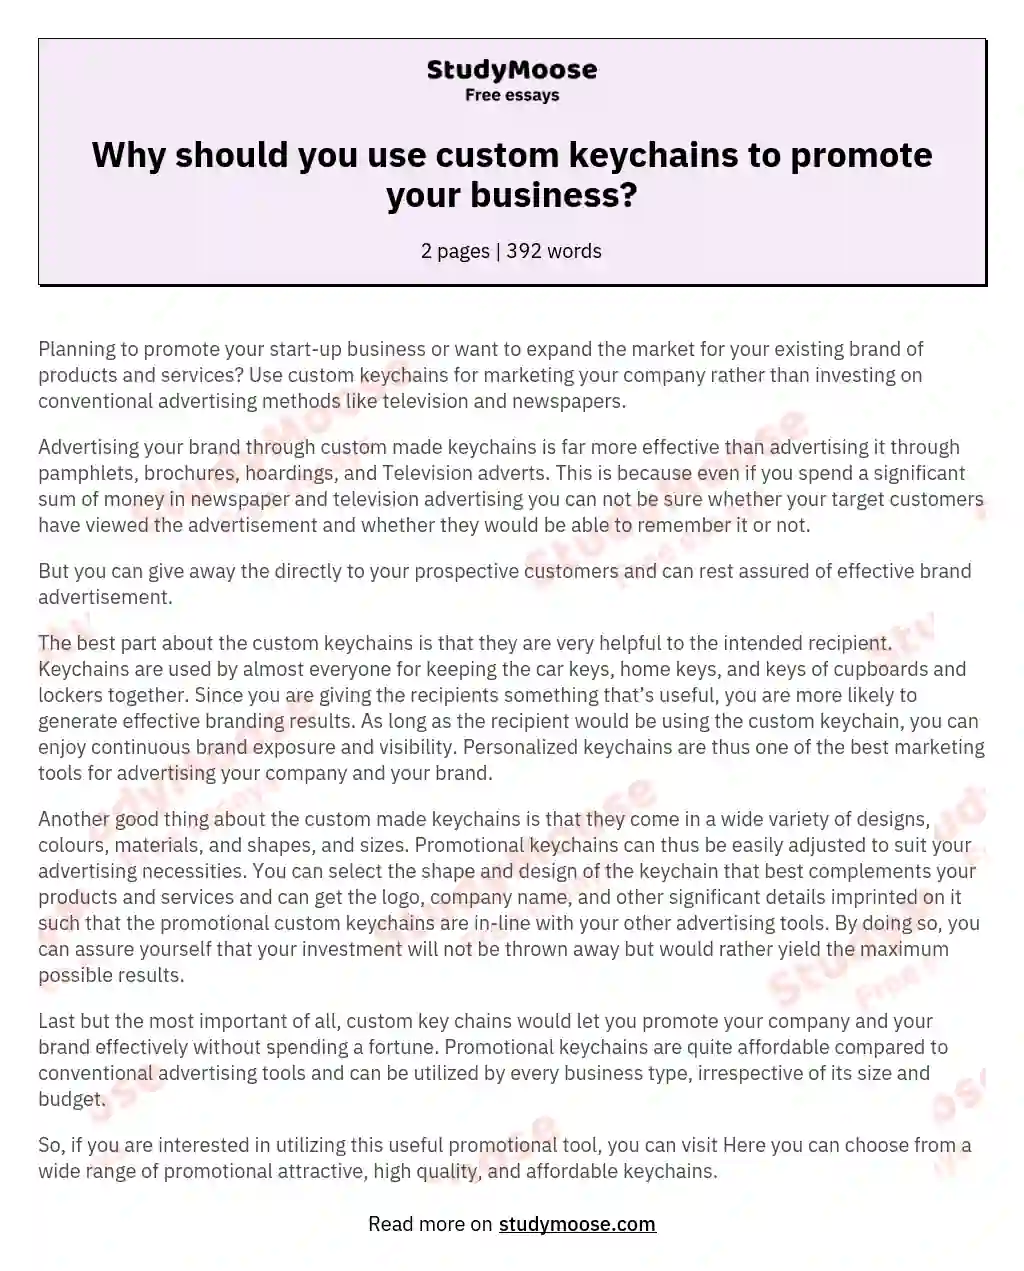 Why should you use custom keychains to promote your business? essay